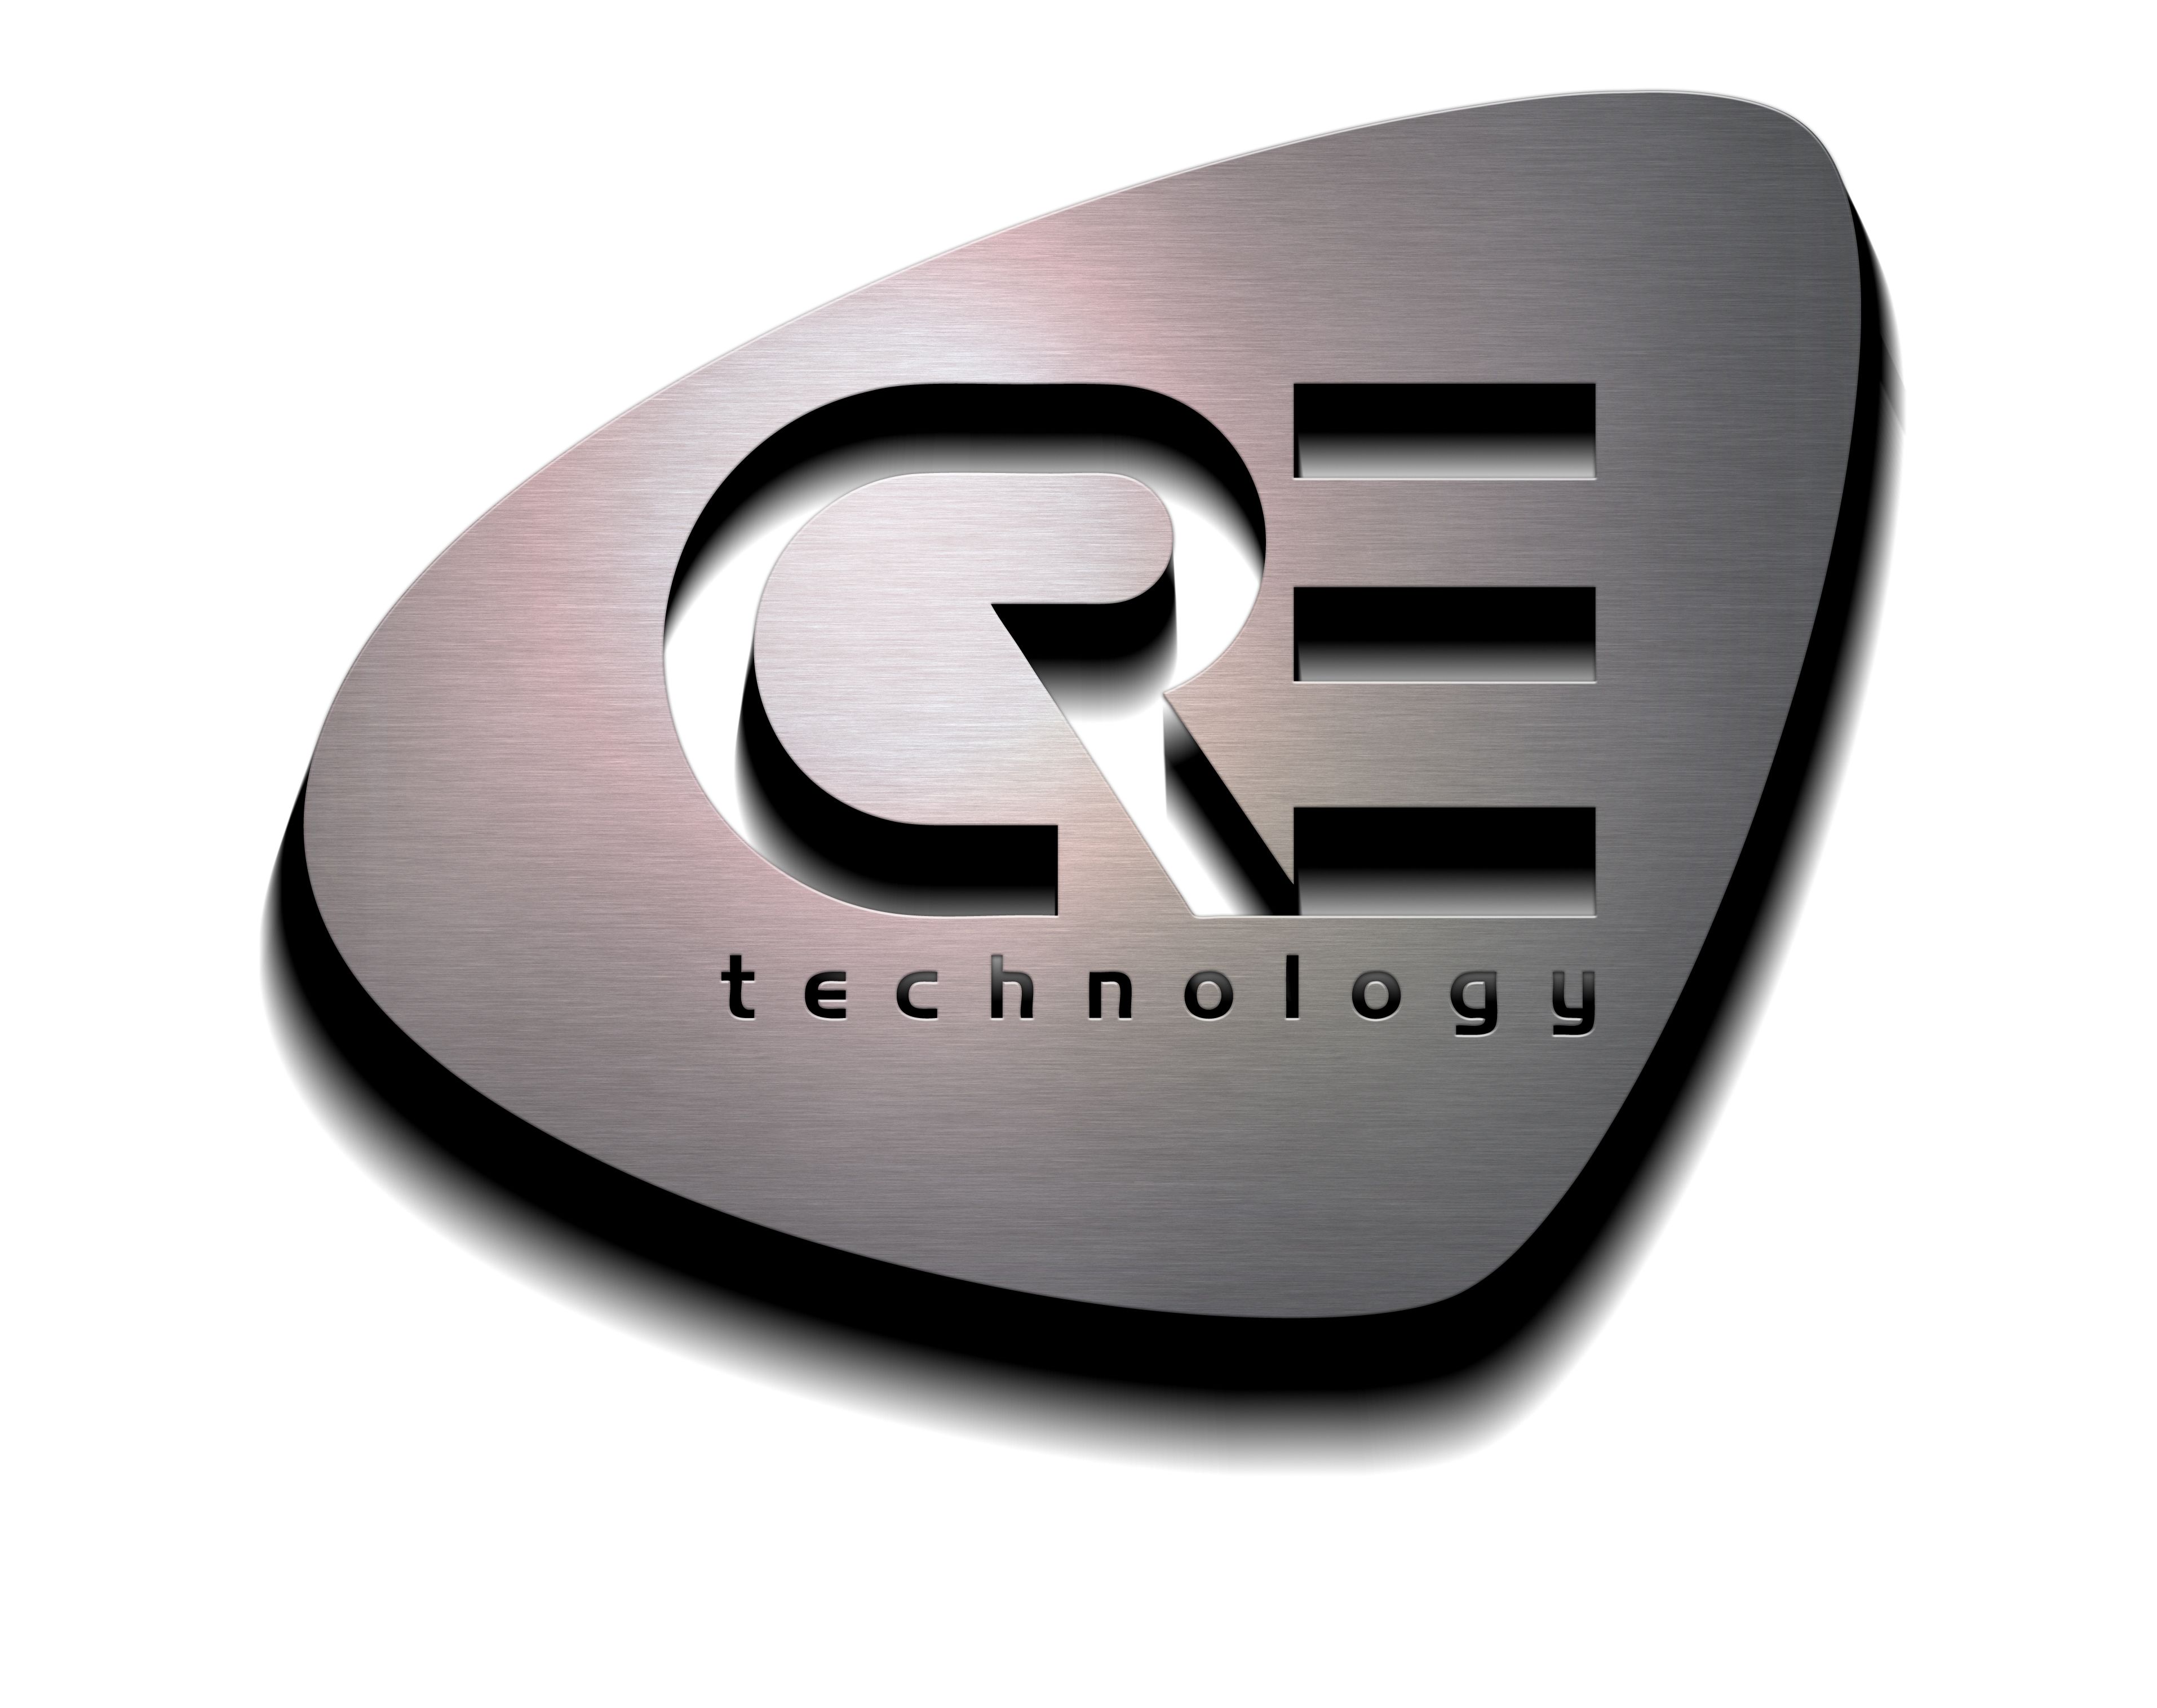 CRE TECHNOLOGY